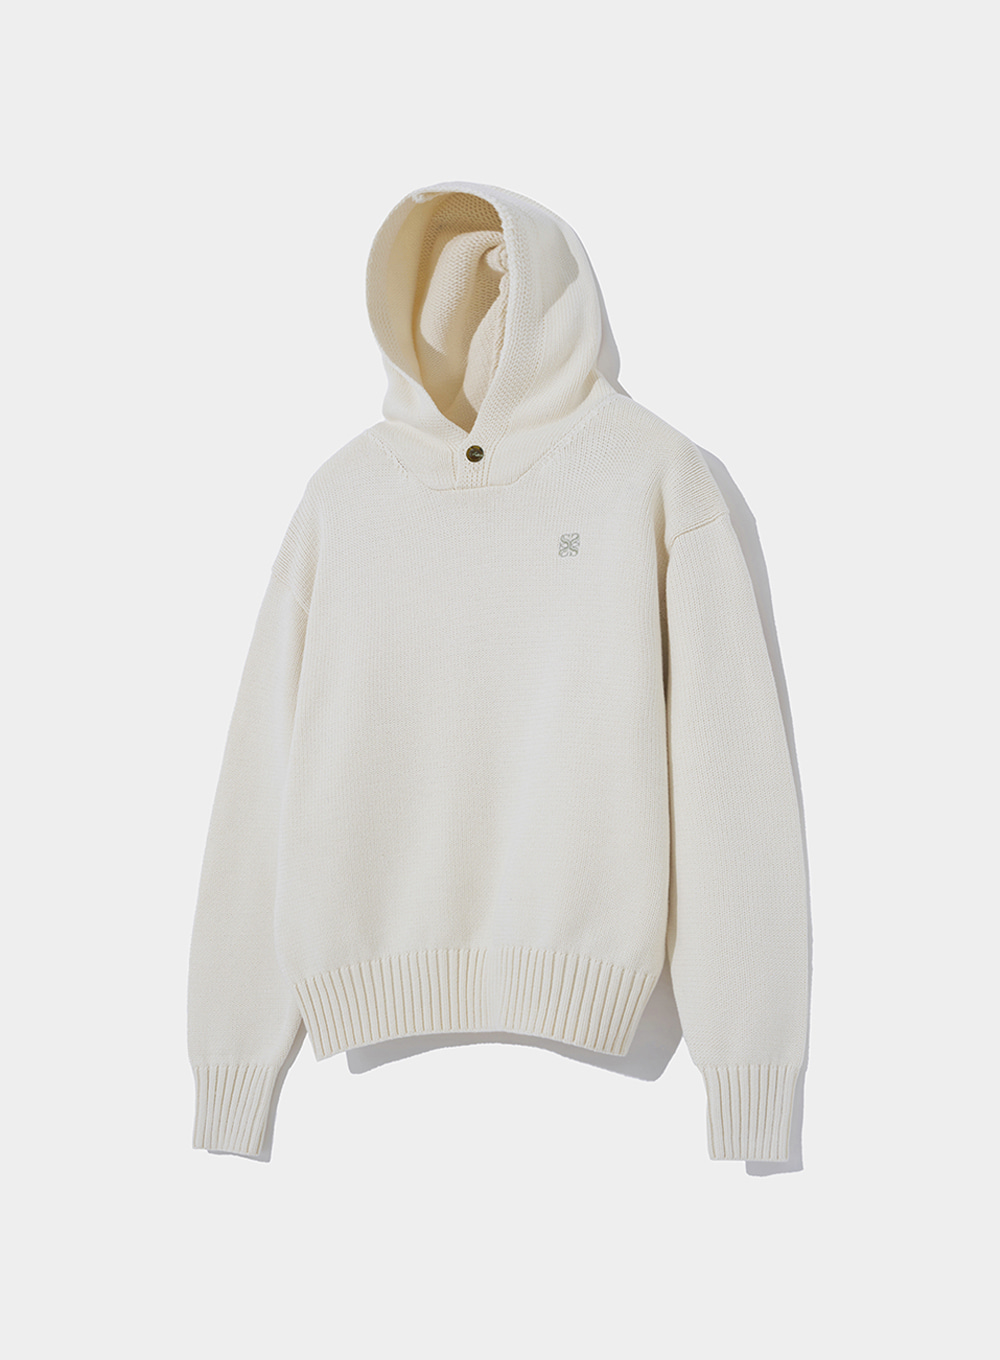 Two Tone Button Hood Knit - Natural Ivory